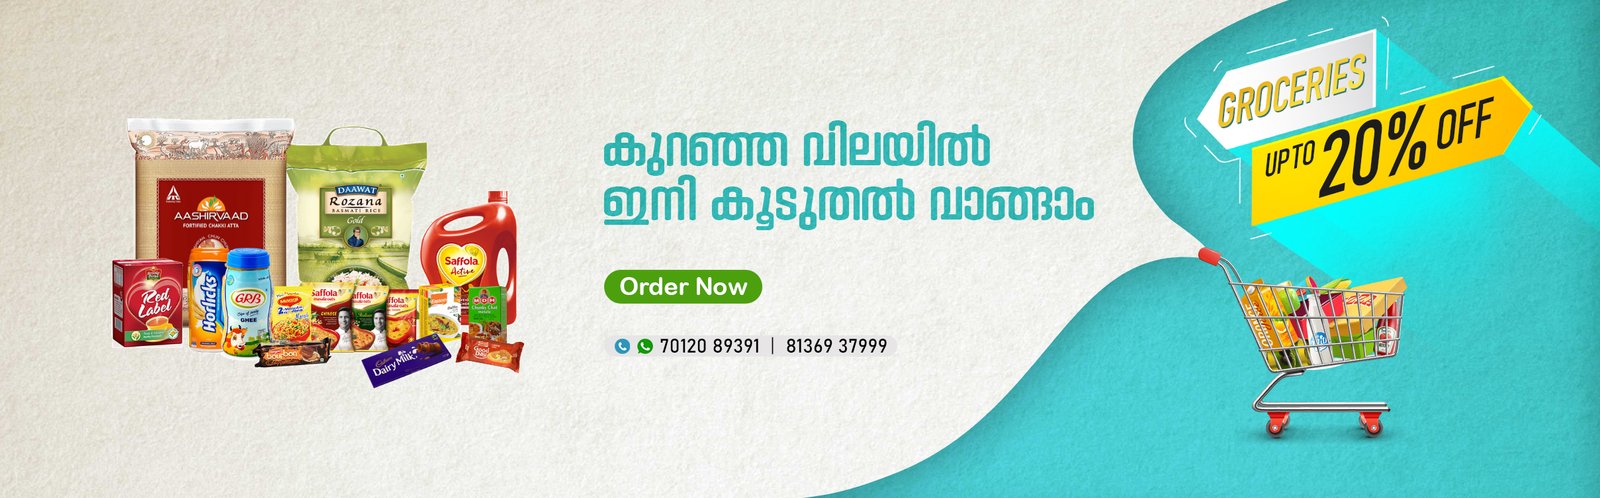 Grocery delivery near me, Home delivery grocery near me, Online grocery delivery, Shopping, Online shopping, , Home Delivery, Online hypermarket,  near me, Best grocery store near me, Provision store near me, Online grocery near me, Grocery store near me, Order groceries online, Order items online